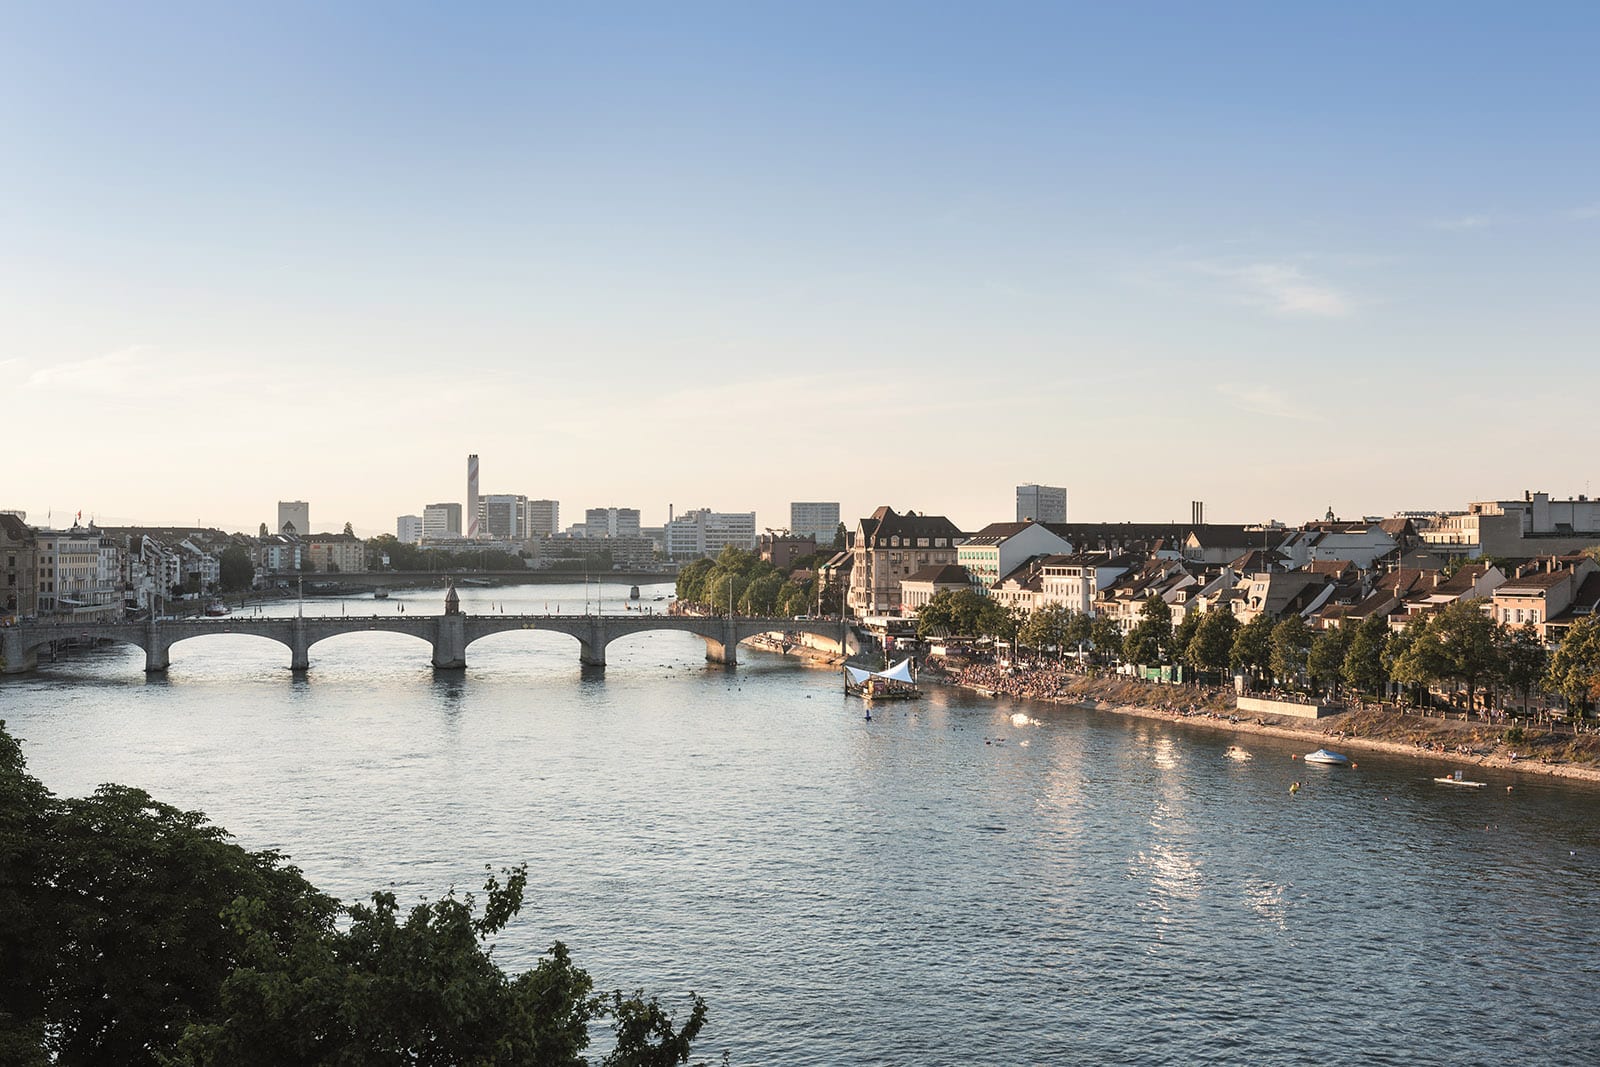 Fluss Rhein in Basel, Switzerland. Concert on the river - place to be for locals and expats